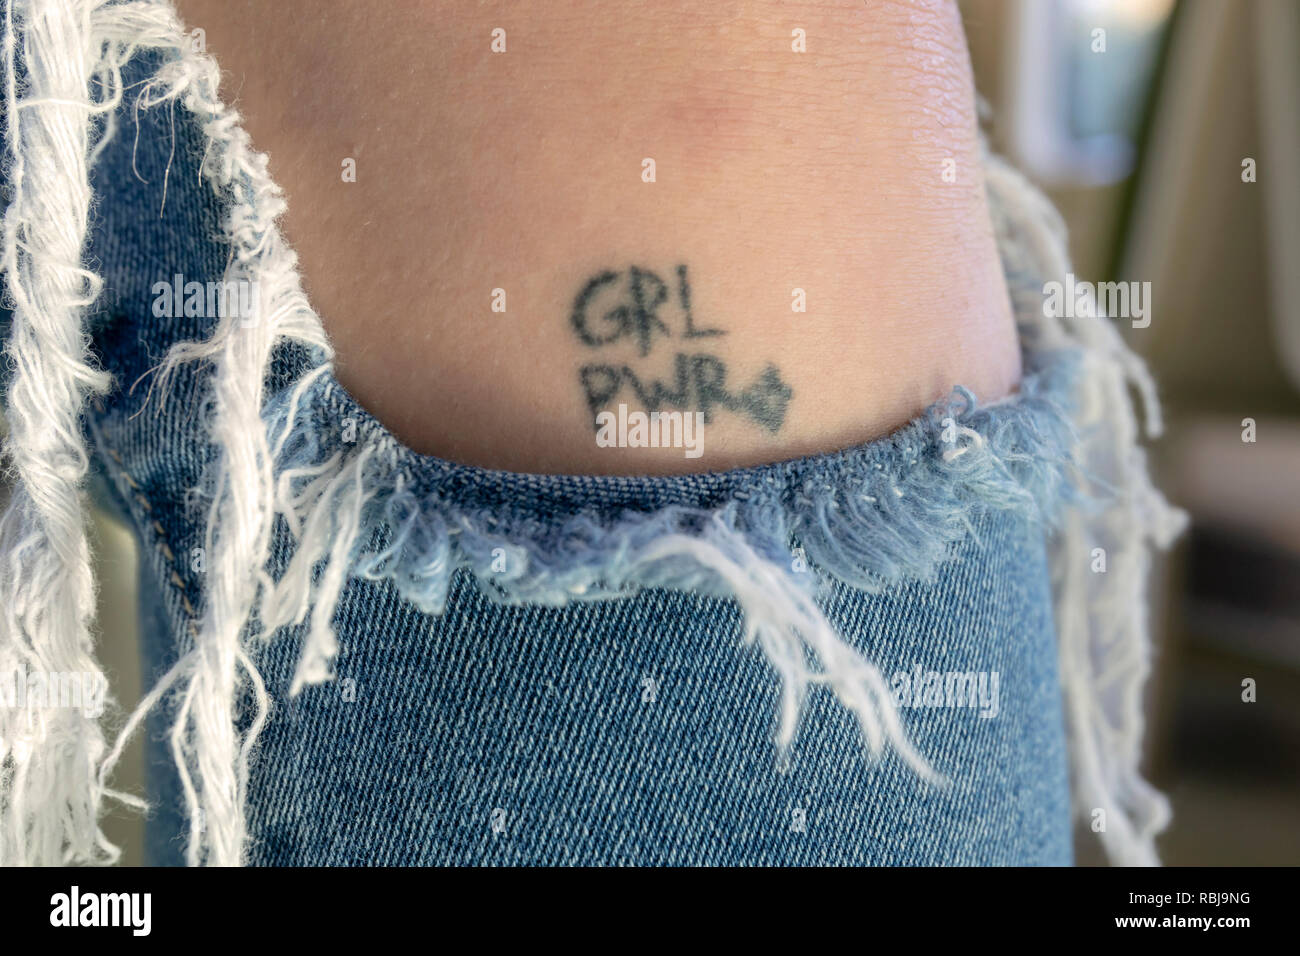 A young woman wearing torn jeans displaying a 'Girl Power' tattoo on her leg. Stock Photo